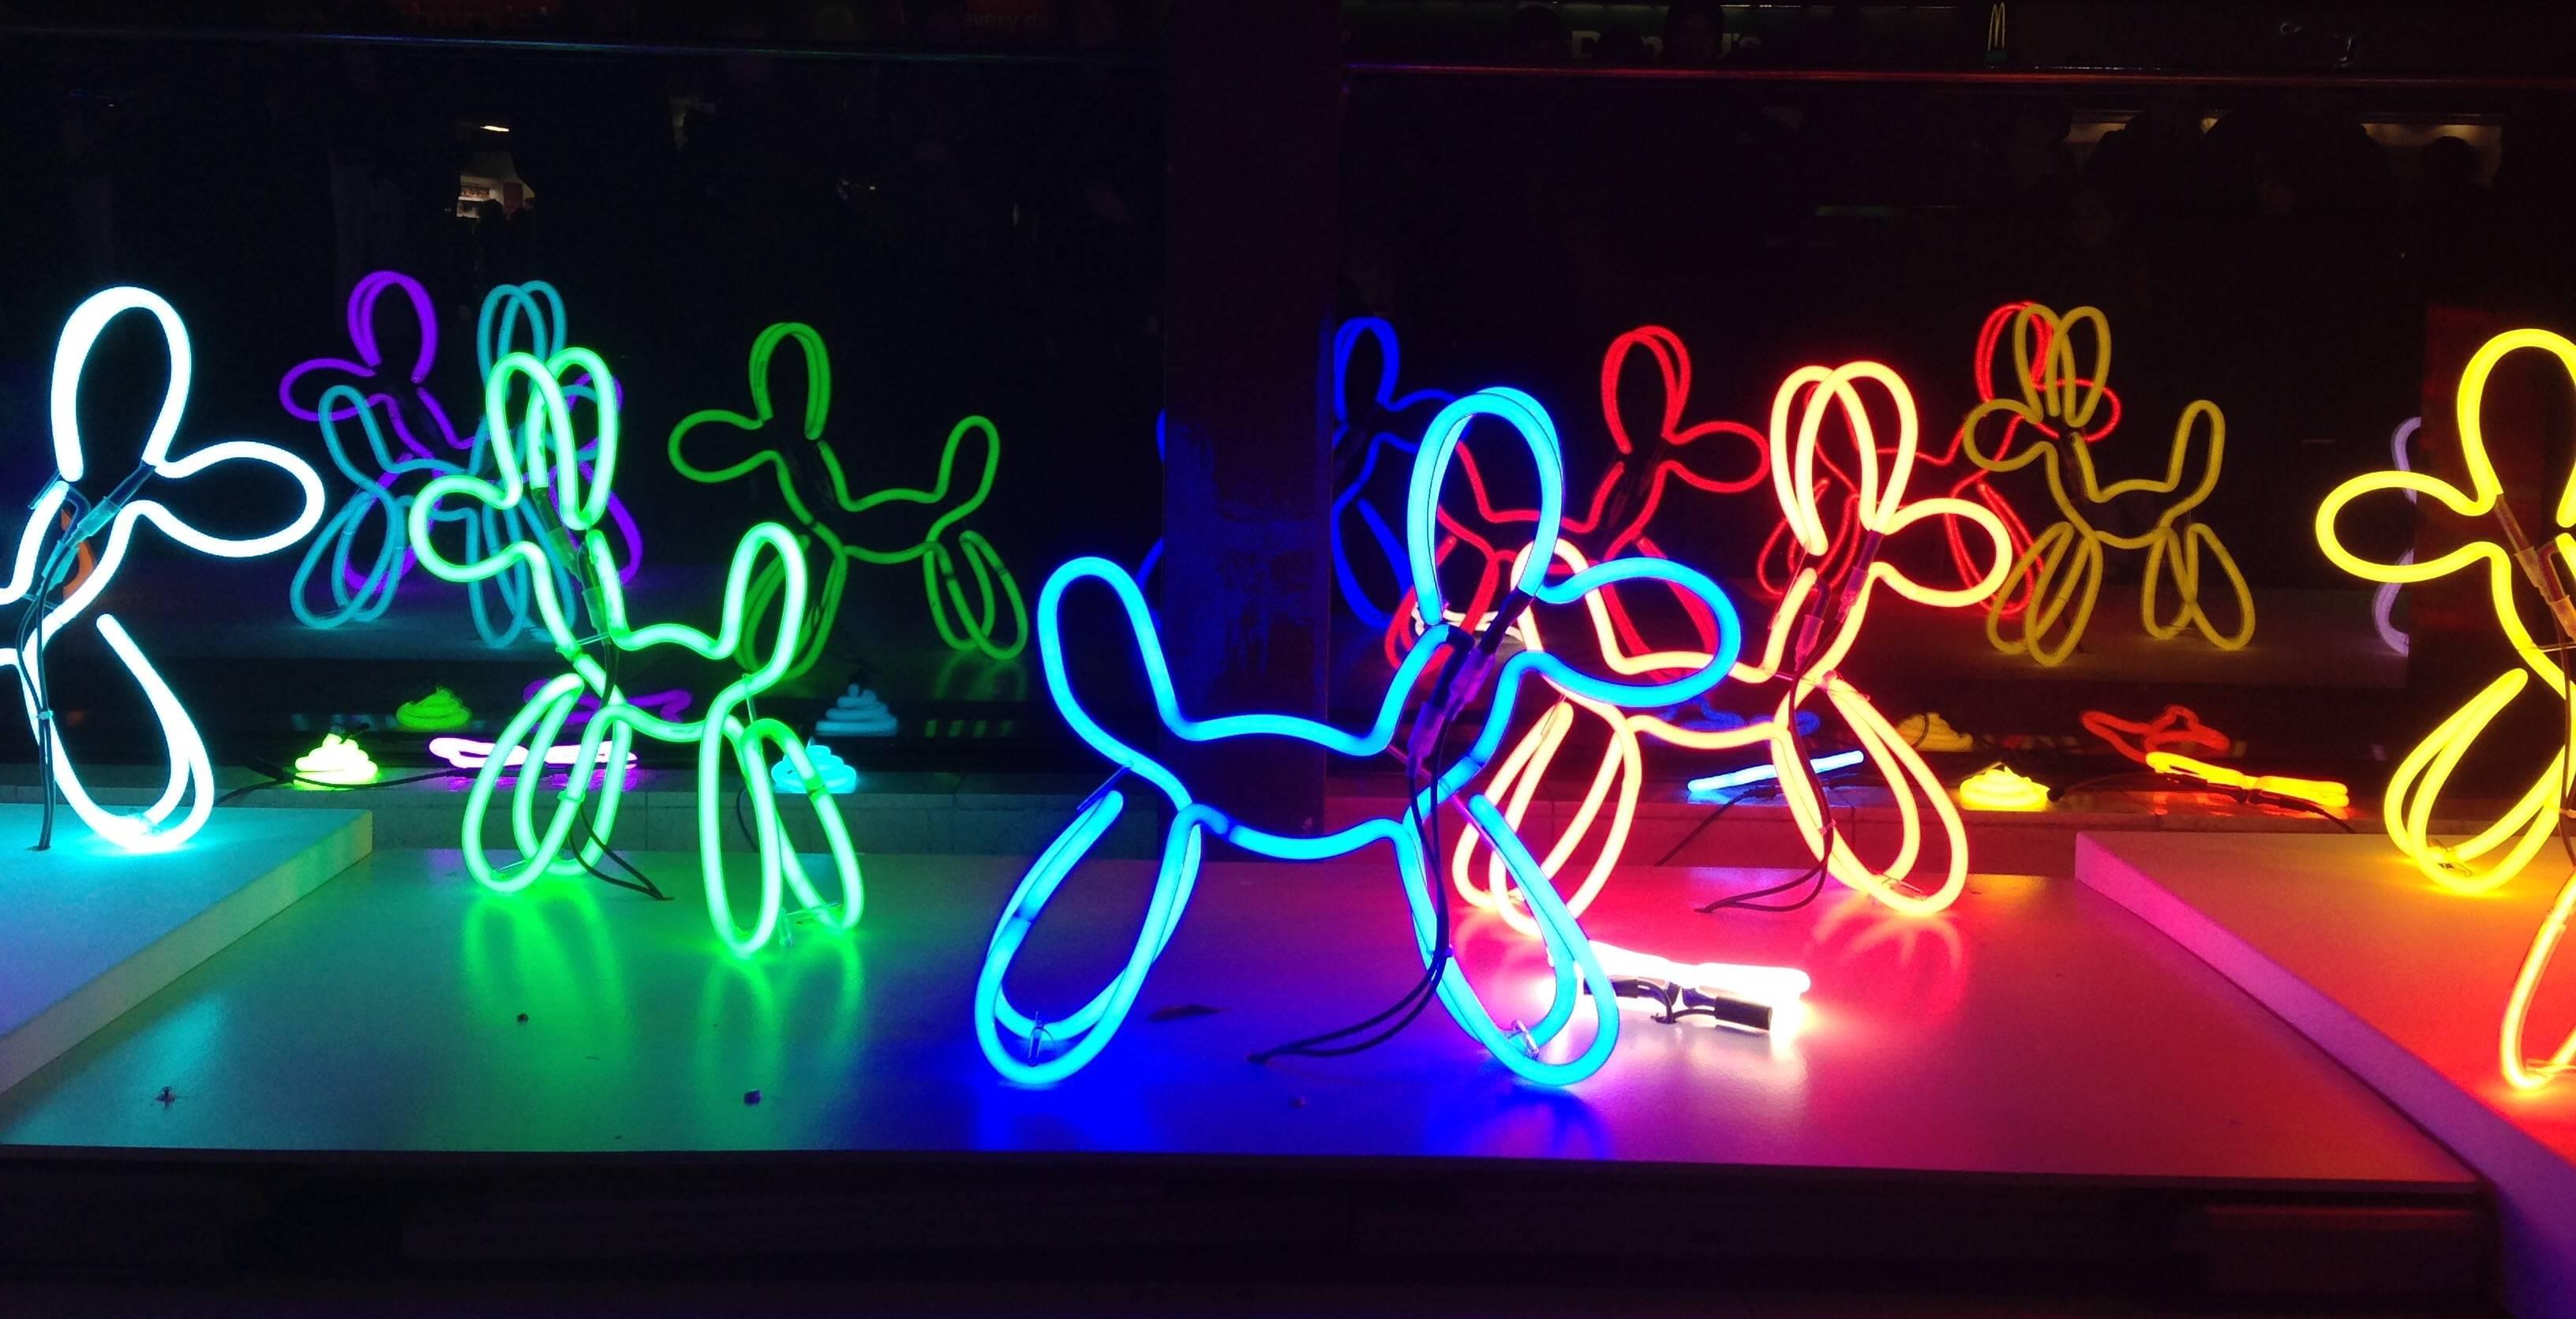 Turquoise Neon Dog, 2015.
Deepa Mann-Kler
Dimensions Variable (Largest size 60 x 15 x 60 cm)
Unique 1/1
£2000 inc Vat

As seen in the London Lumiere Festival 2016, Deepa Mann-Klerr's Series of 12 uniquely coloured Neon Dogs, are now available